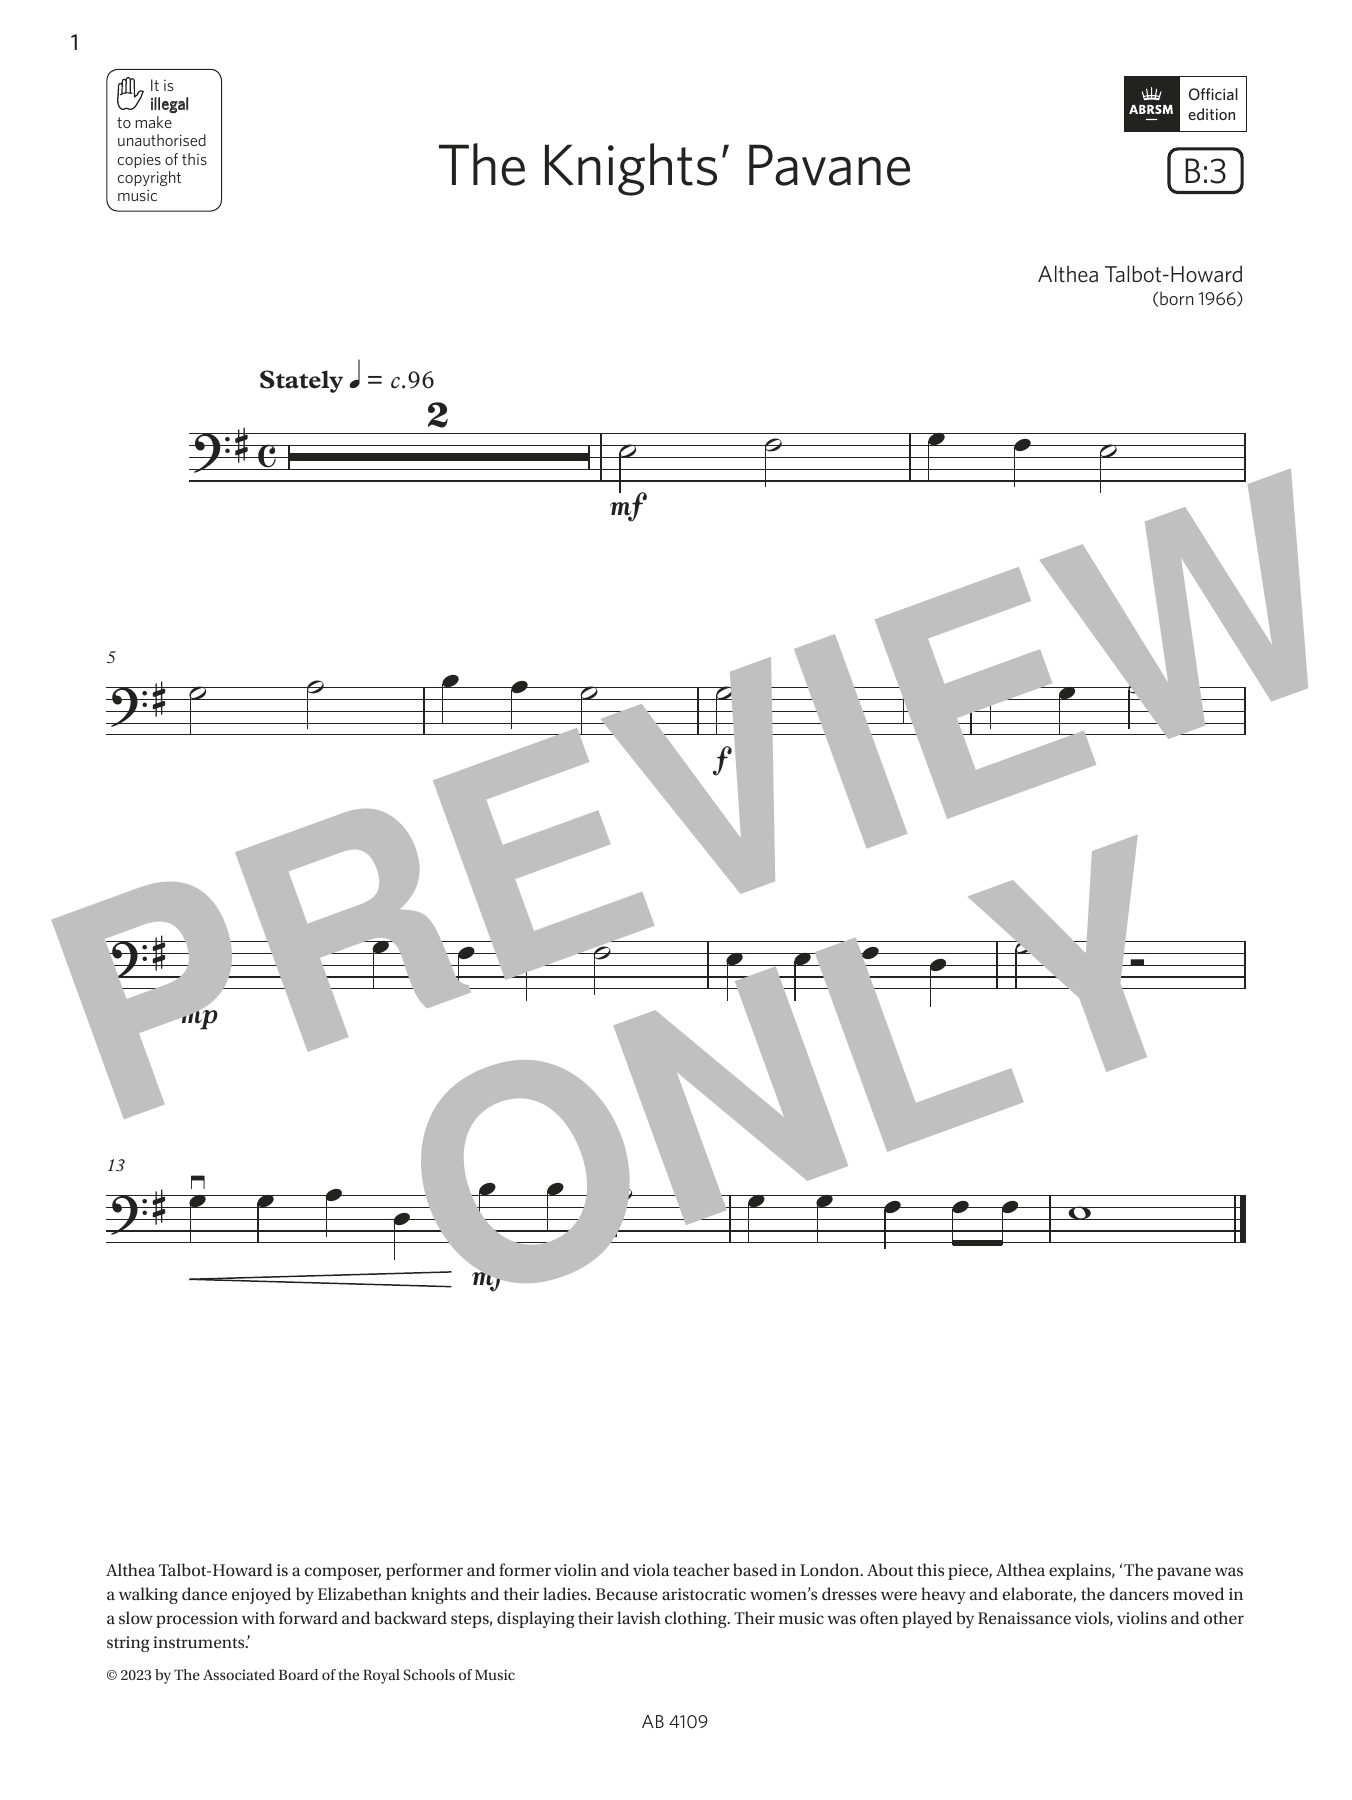 Download Althea Talbot-Howard The Knights' Pavane (Grade Initial, B3, Sheet Music